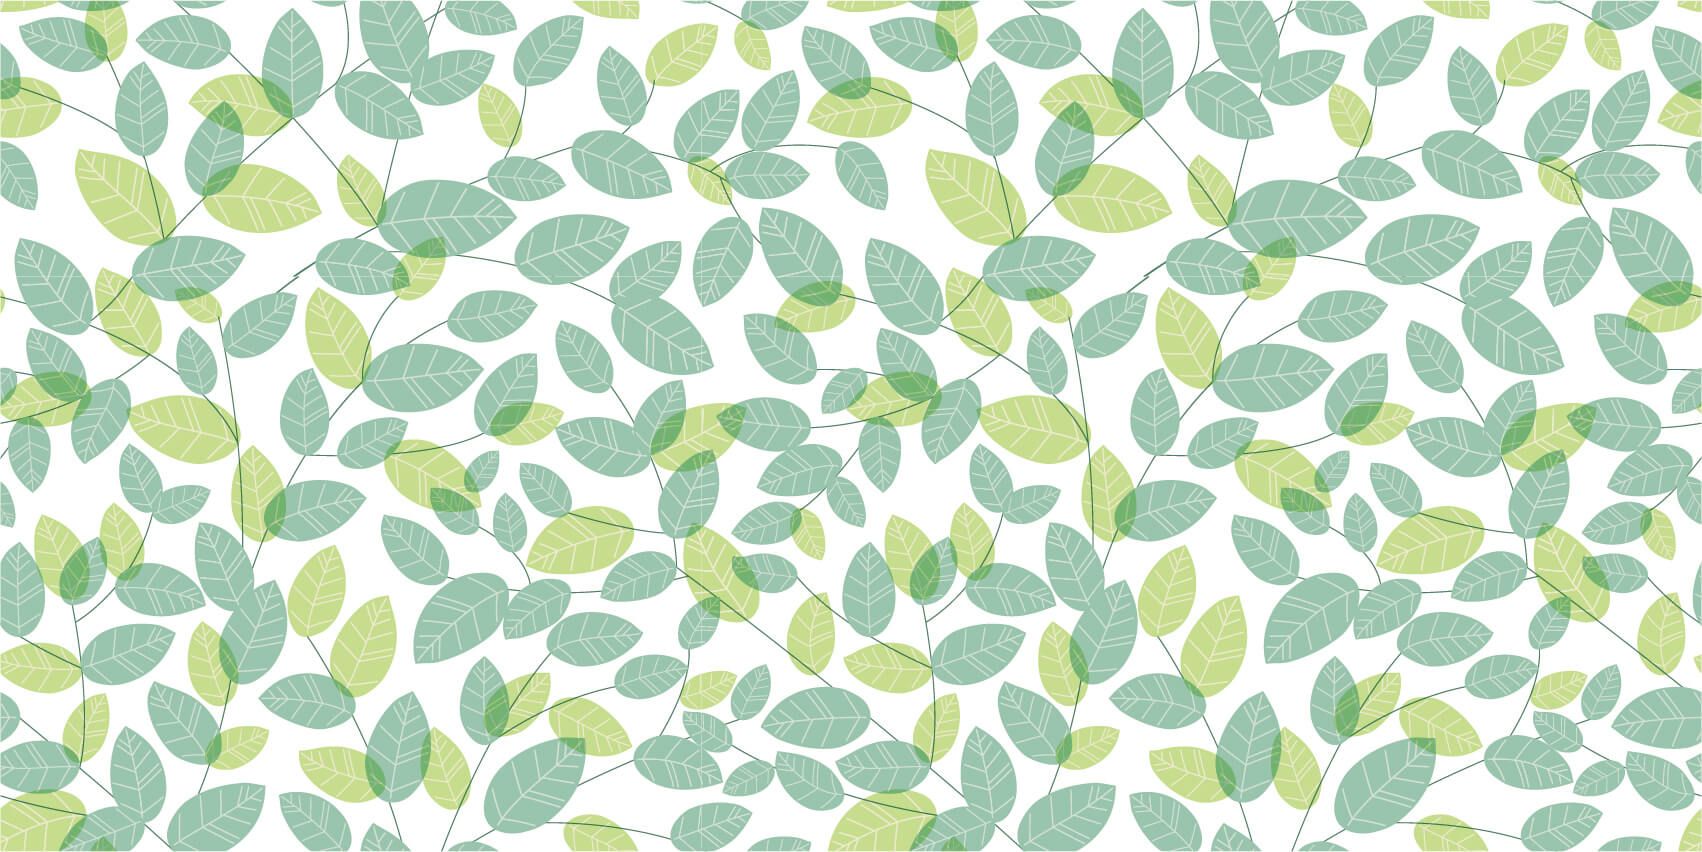 Leaves - Browse pattern - Hobby room